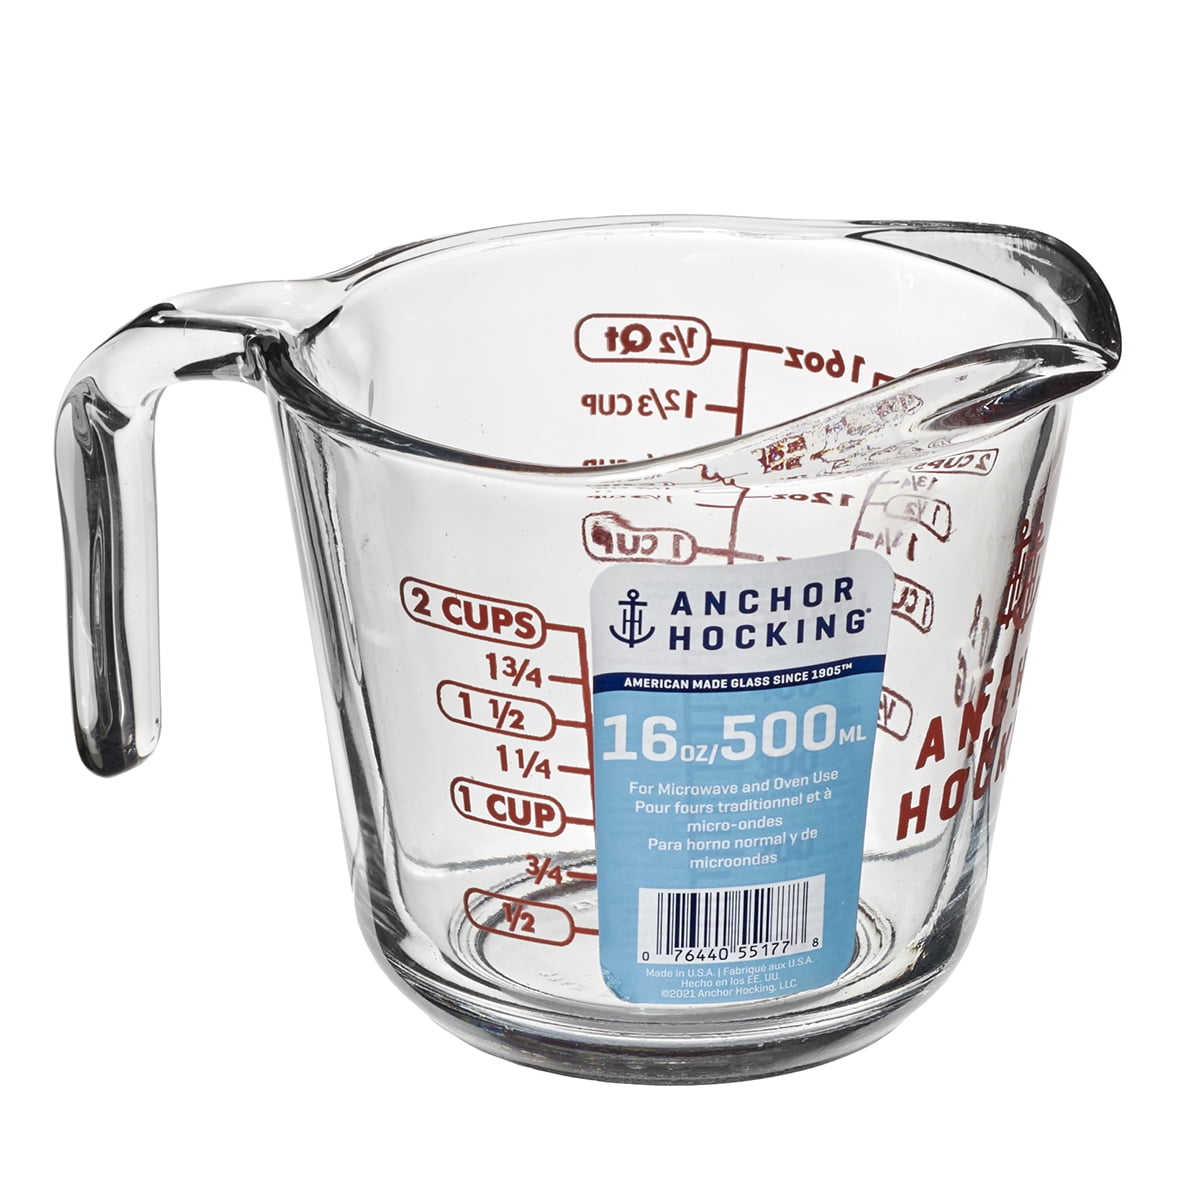 2 Cup Measuring Cup - HPG - Promotional Products Supplier